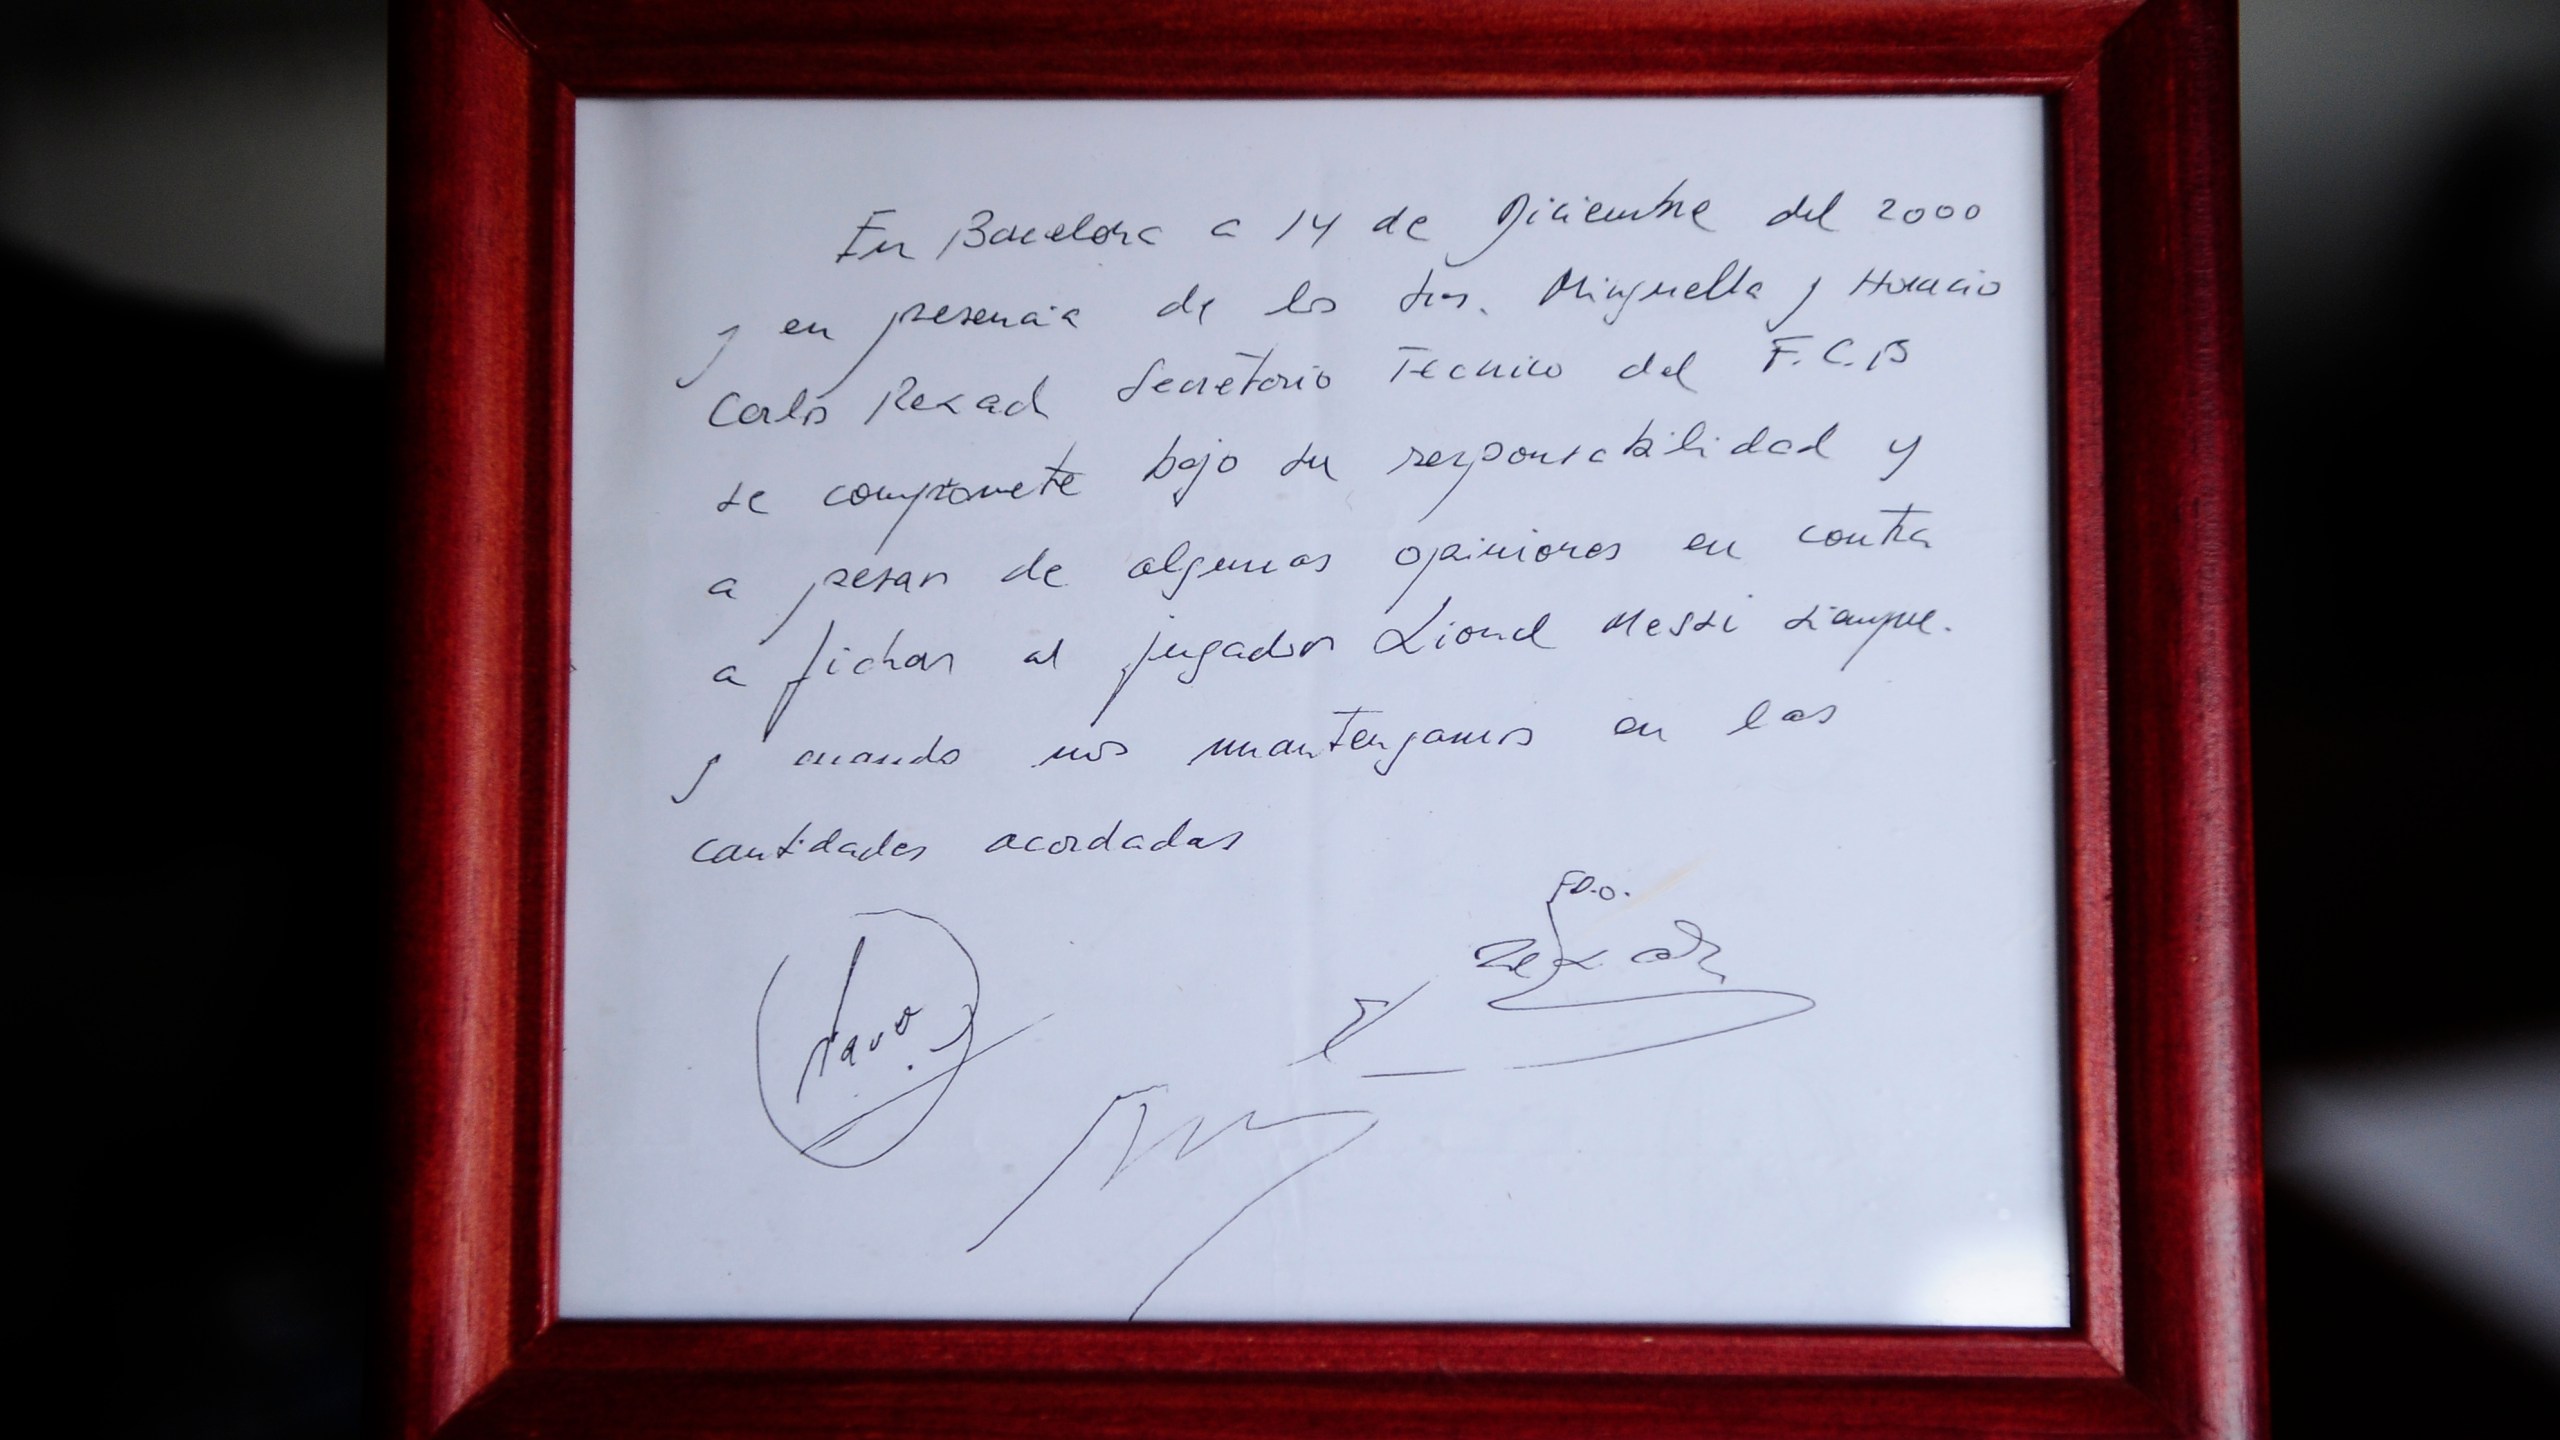 FILE - A framed copy of the napkin linking the 13-year-old Lionel Messi to FC Barcelona is seen in Barcelona, Spain on Jan. 5, 2012. British auction house Bonhams says the famous napkin that linked a young Lionel Messi to Barcelona has sold for $965,000. An agreement in principle to sign then 13-year-old Messi was written on the napkin almost 25 years ago at a Barcelona tennis club. (AP Photo/Manu Fernandez, File)